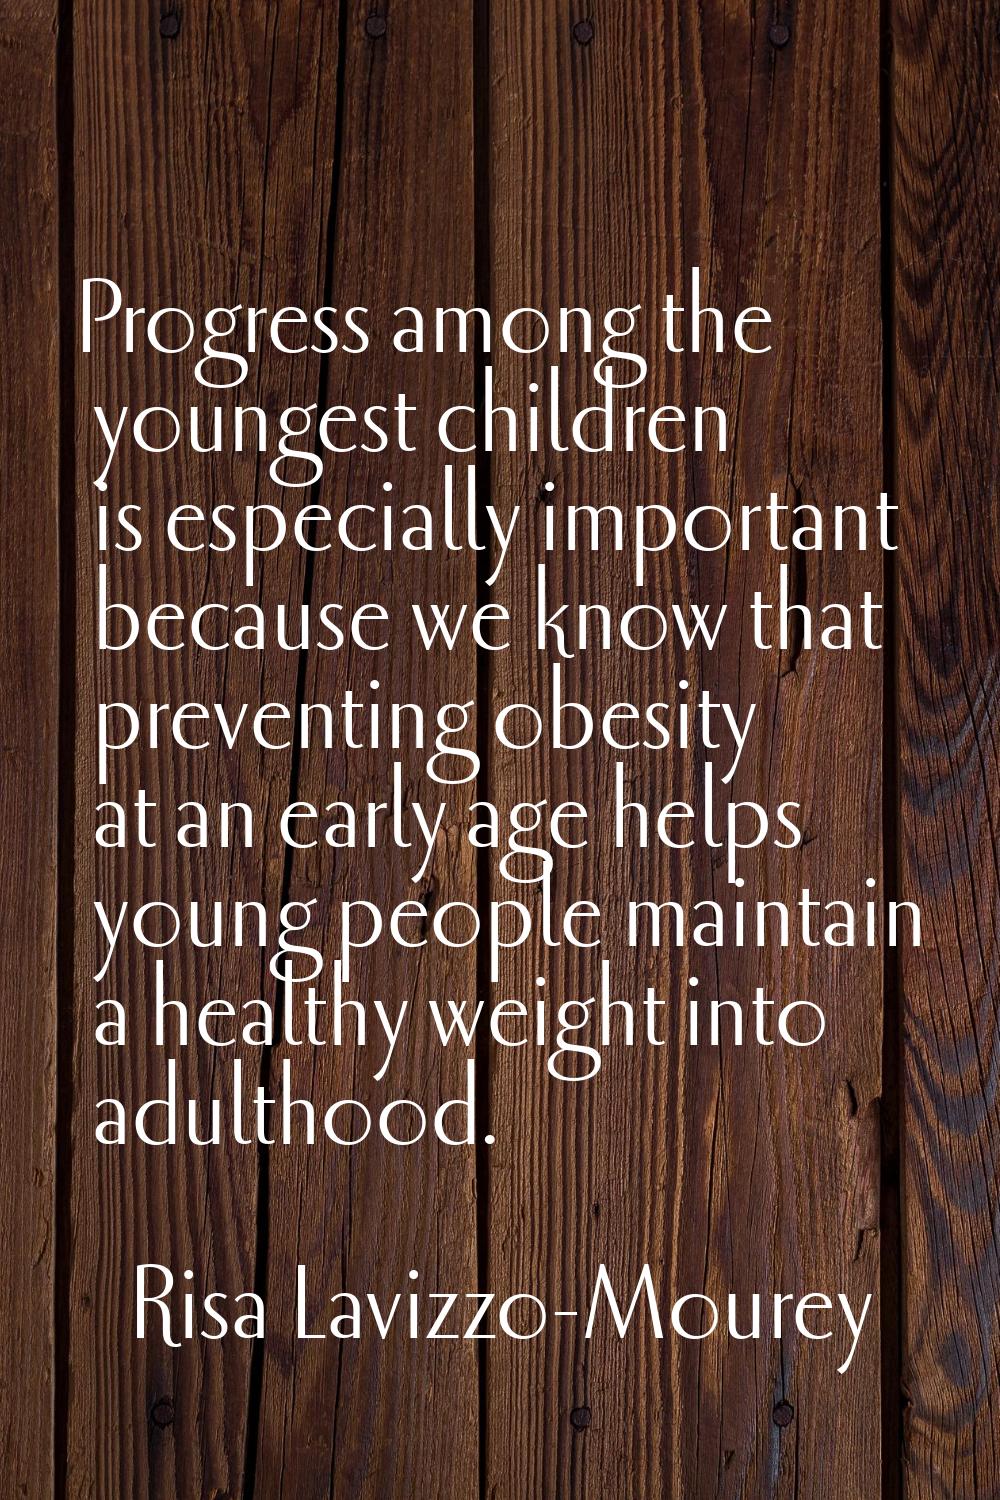 Progress among the youngest children is especially important because we know that preventing obesit